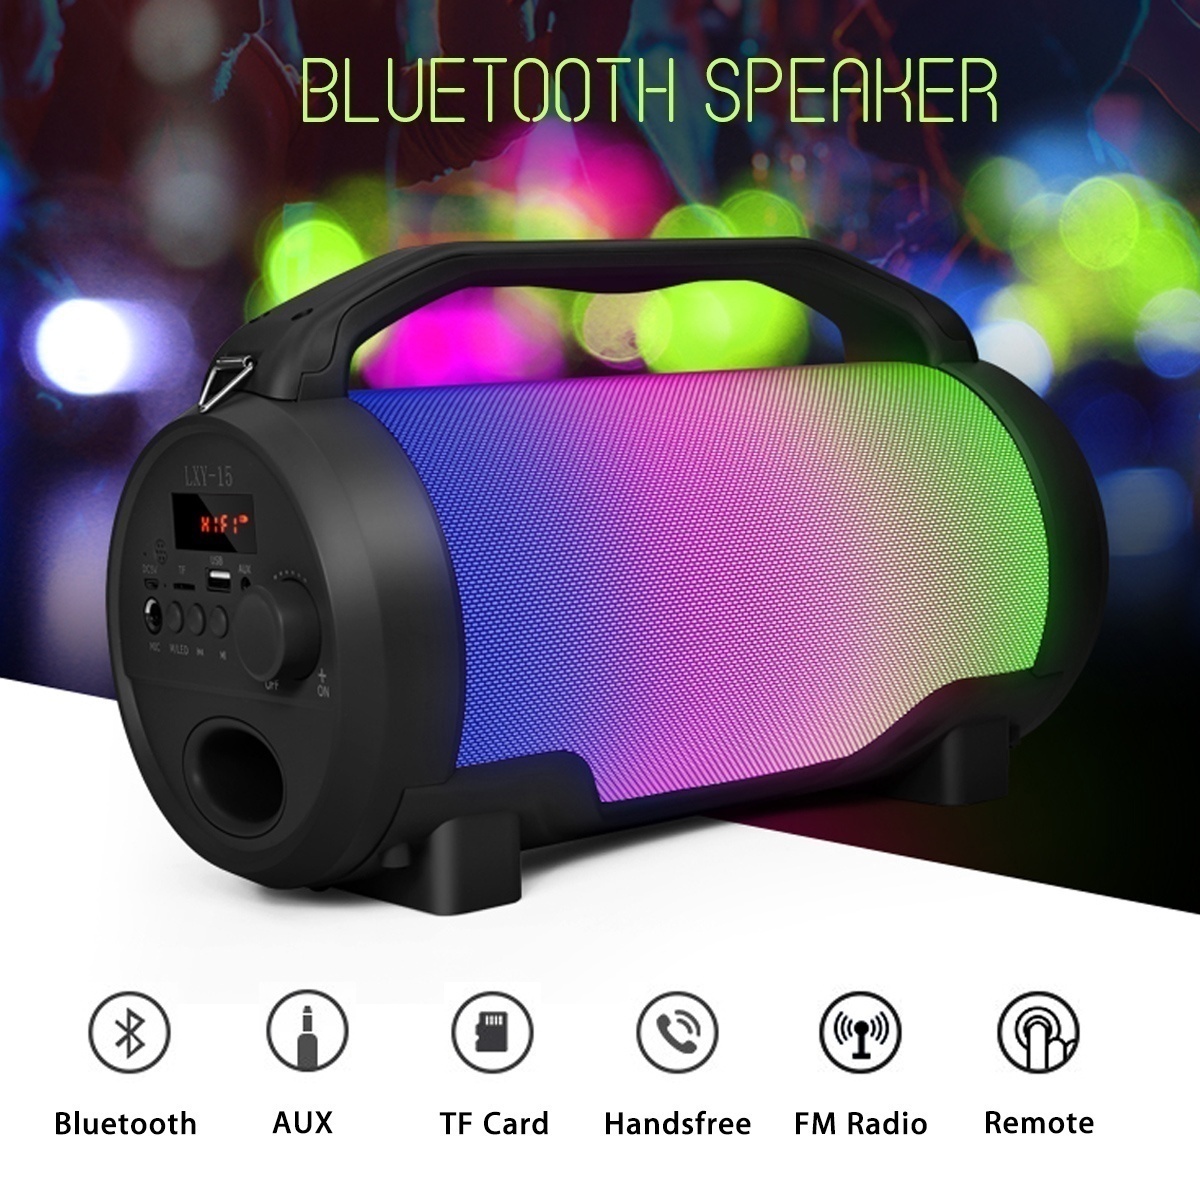 Bakeey-Portable-Wireless-bluetooth-Stereo-Speaker-With-TF-Card-Player-FM-Radio-For-Tablet-Smartphone-1637582-1